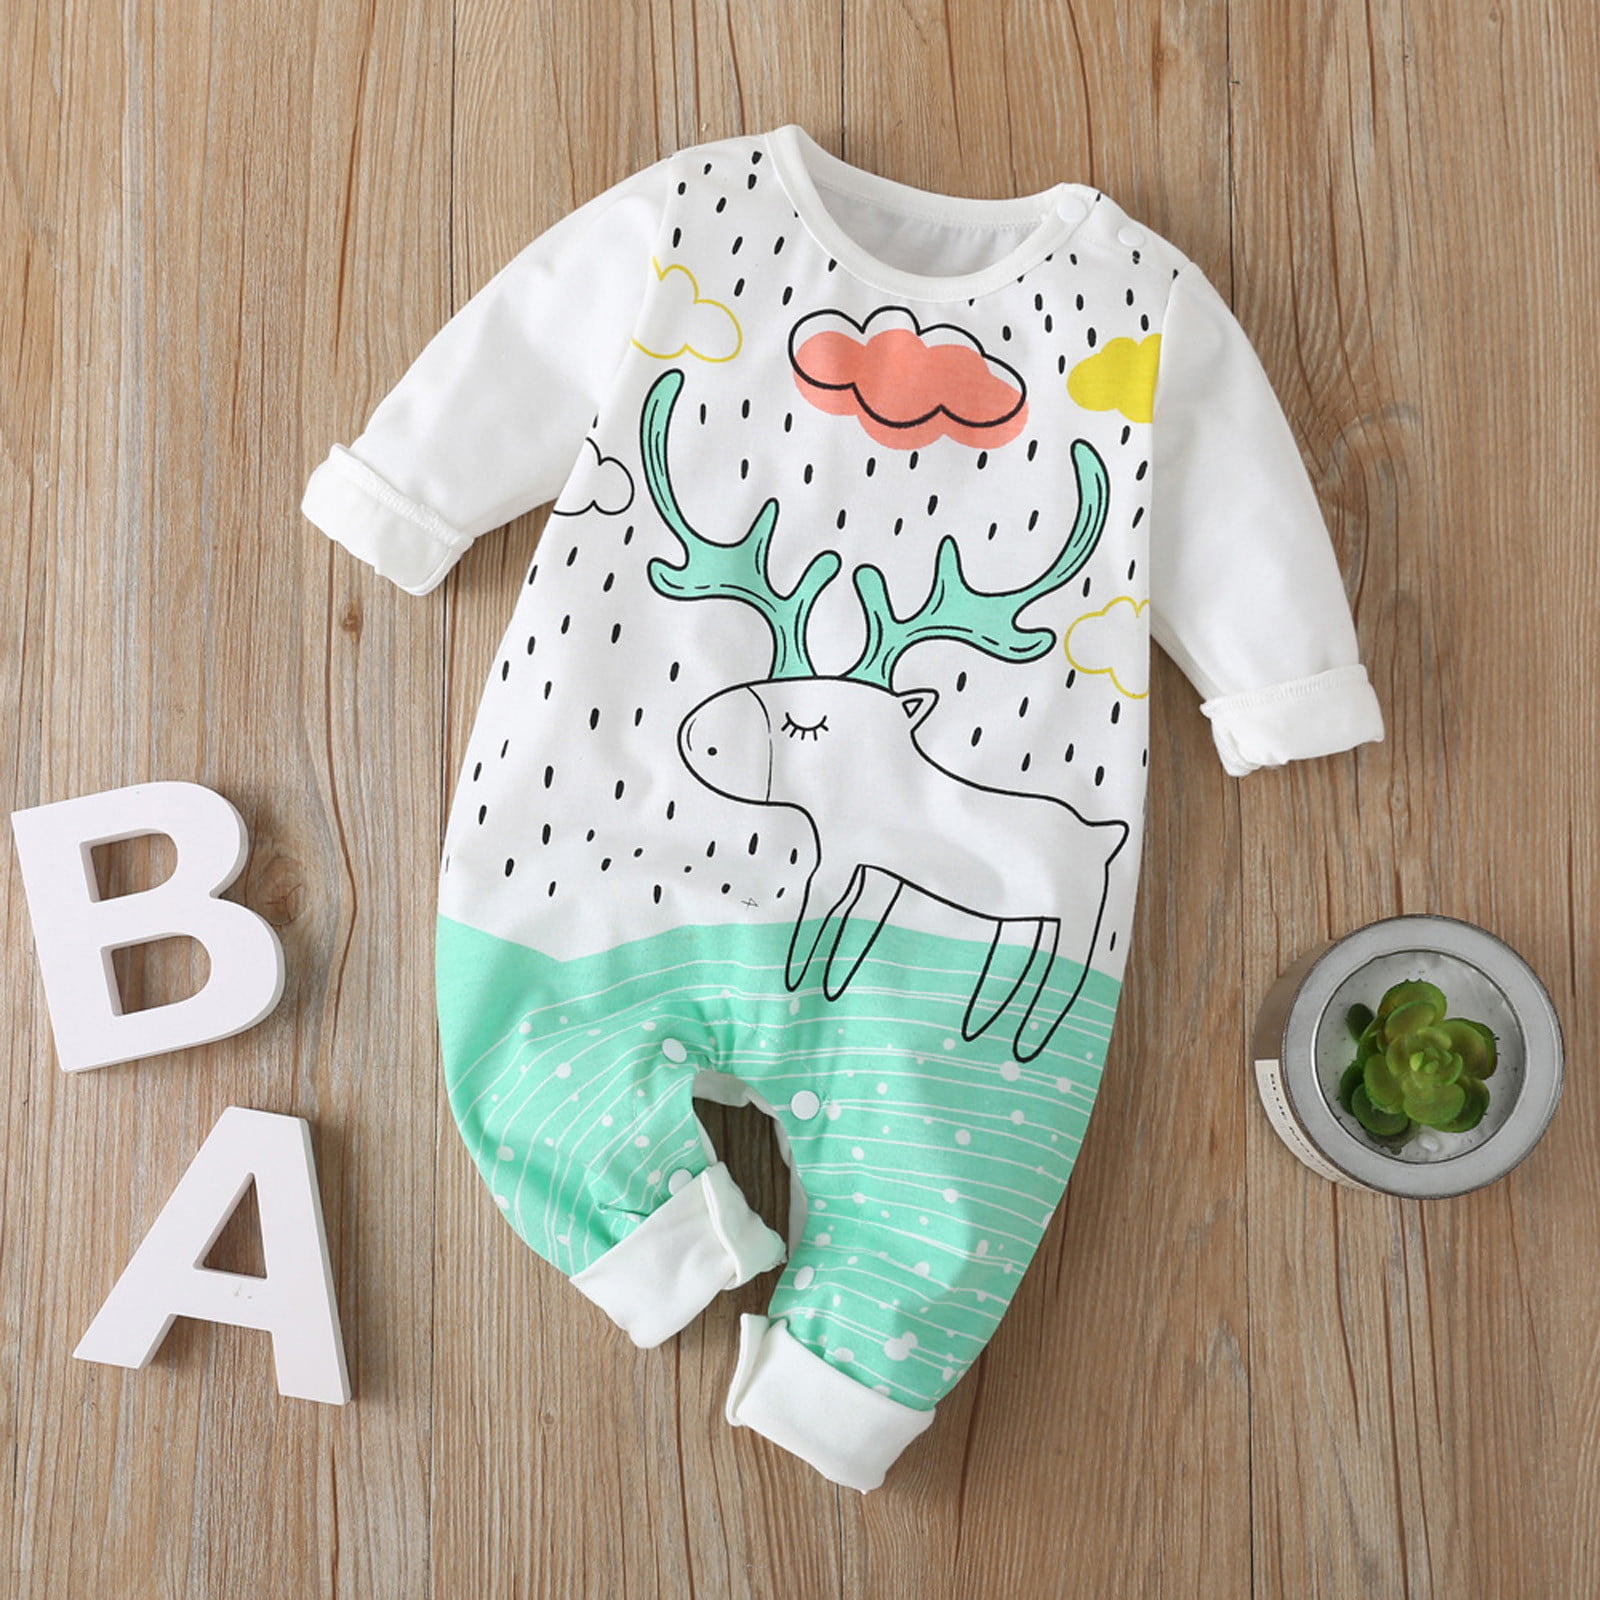 Baby Girl Boy Clothes Animals Cartoon Bodysuit Romper Jumpsuit Outfits Baby One Piece Long Sleeve 